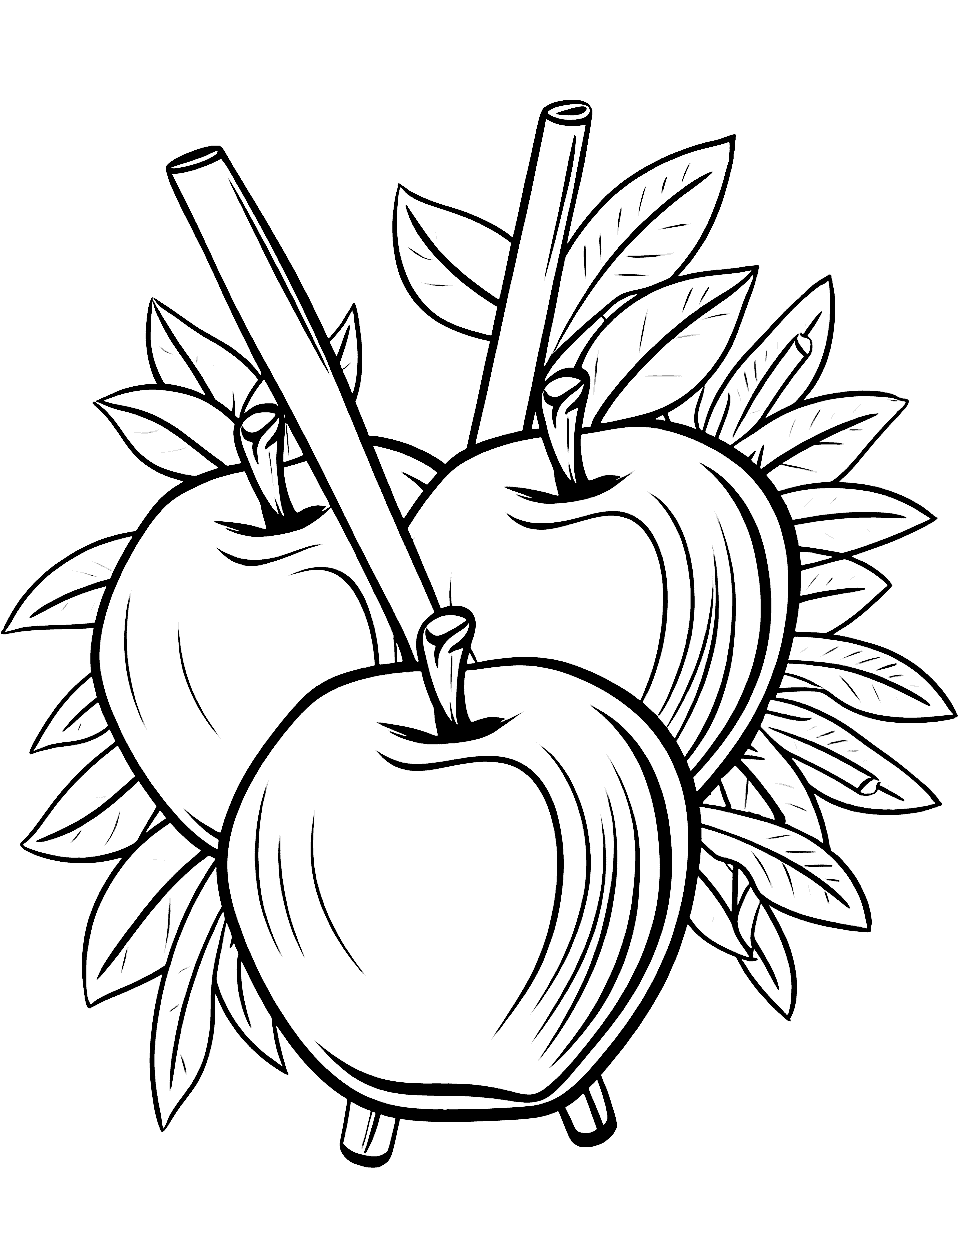 Apples and Cinnamon Sticks Apple Coloring Page - A bunch of apples surrounded by fragrant cinnamon sticks.